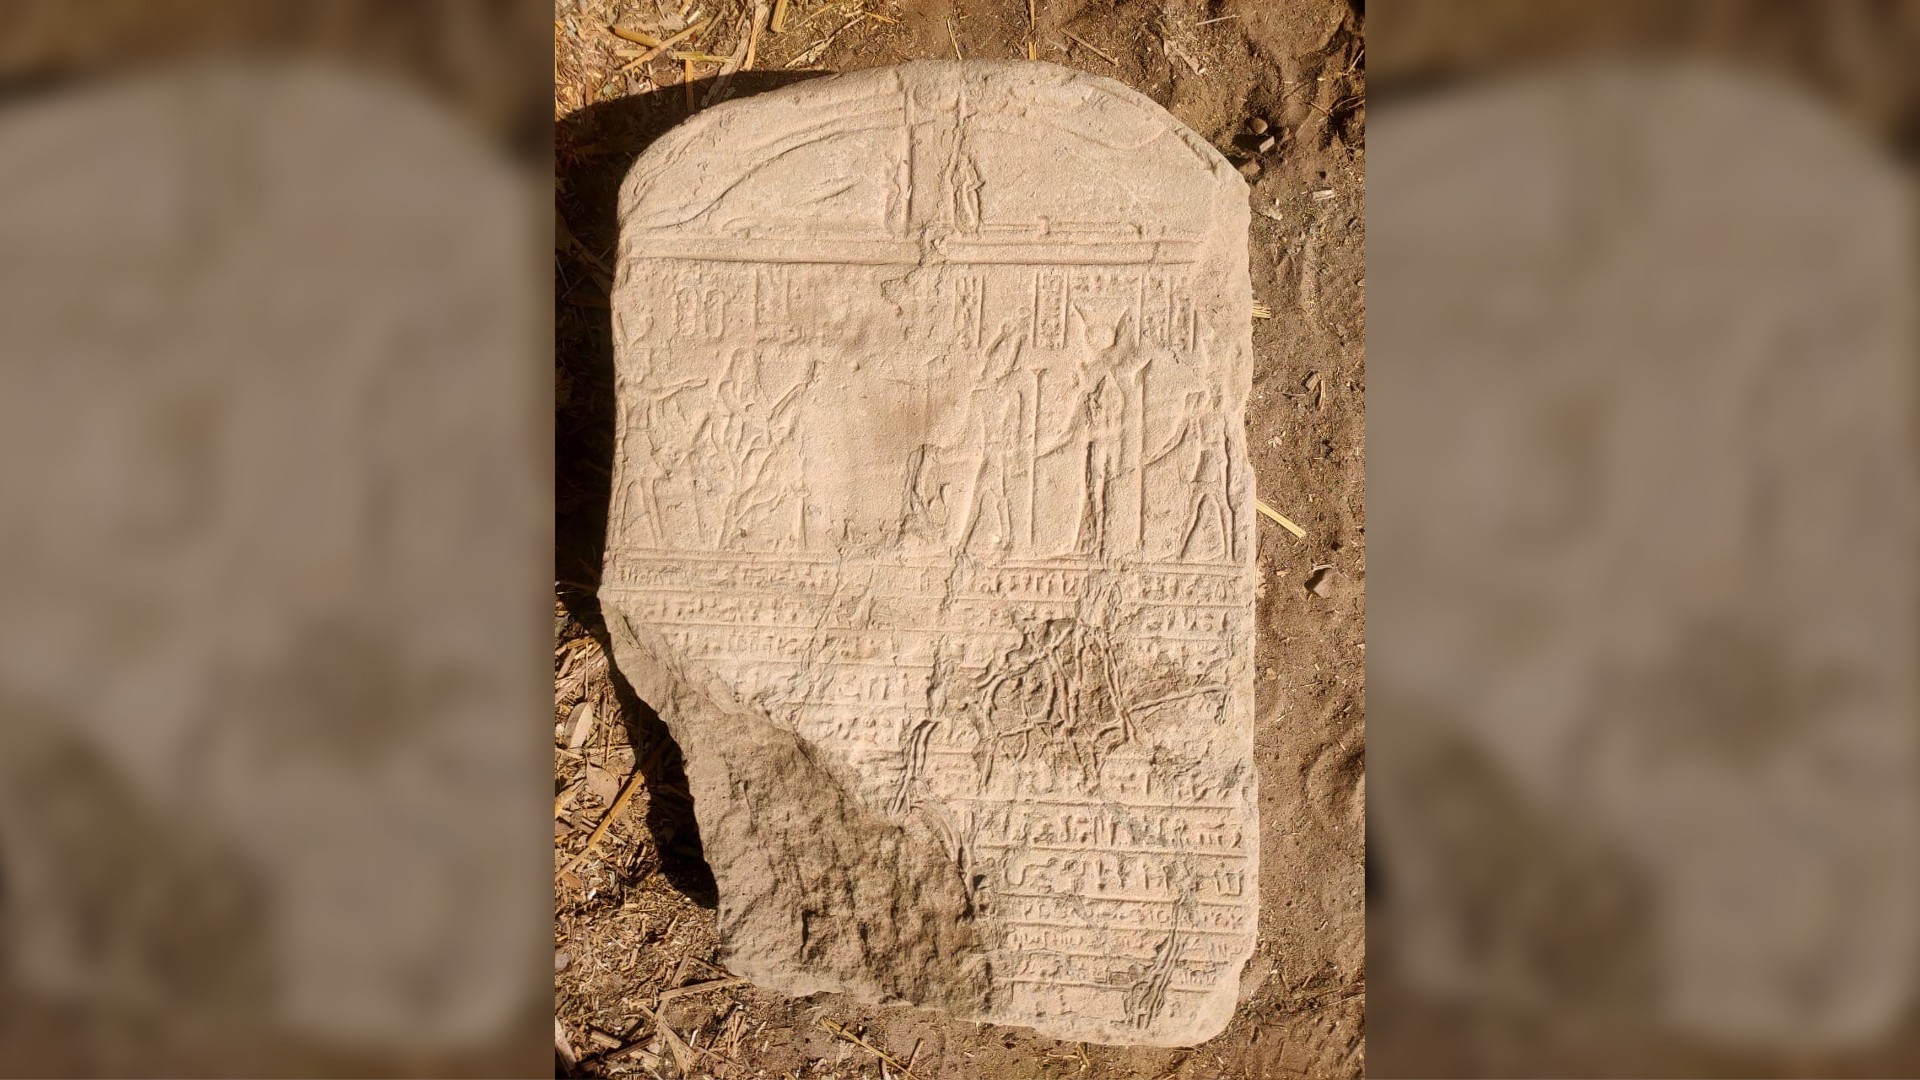 This tablet was found near the sphinx and has hieroglyphic and demotic (a script derived from hieroglyphs) writing on it.